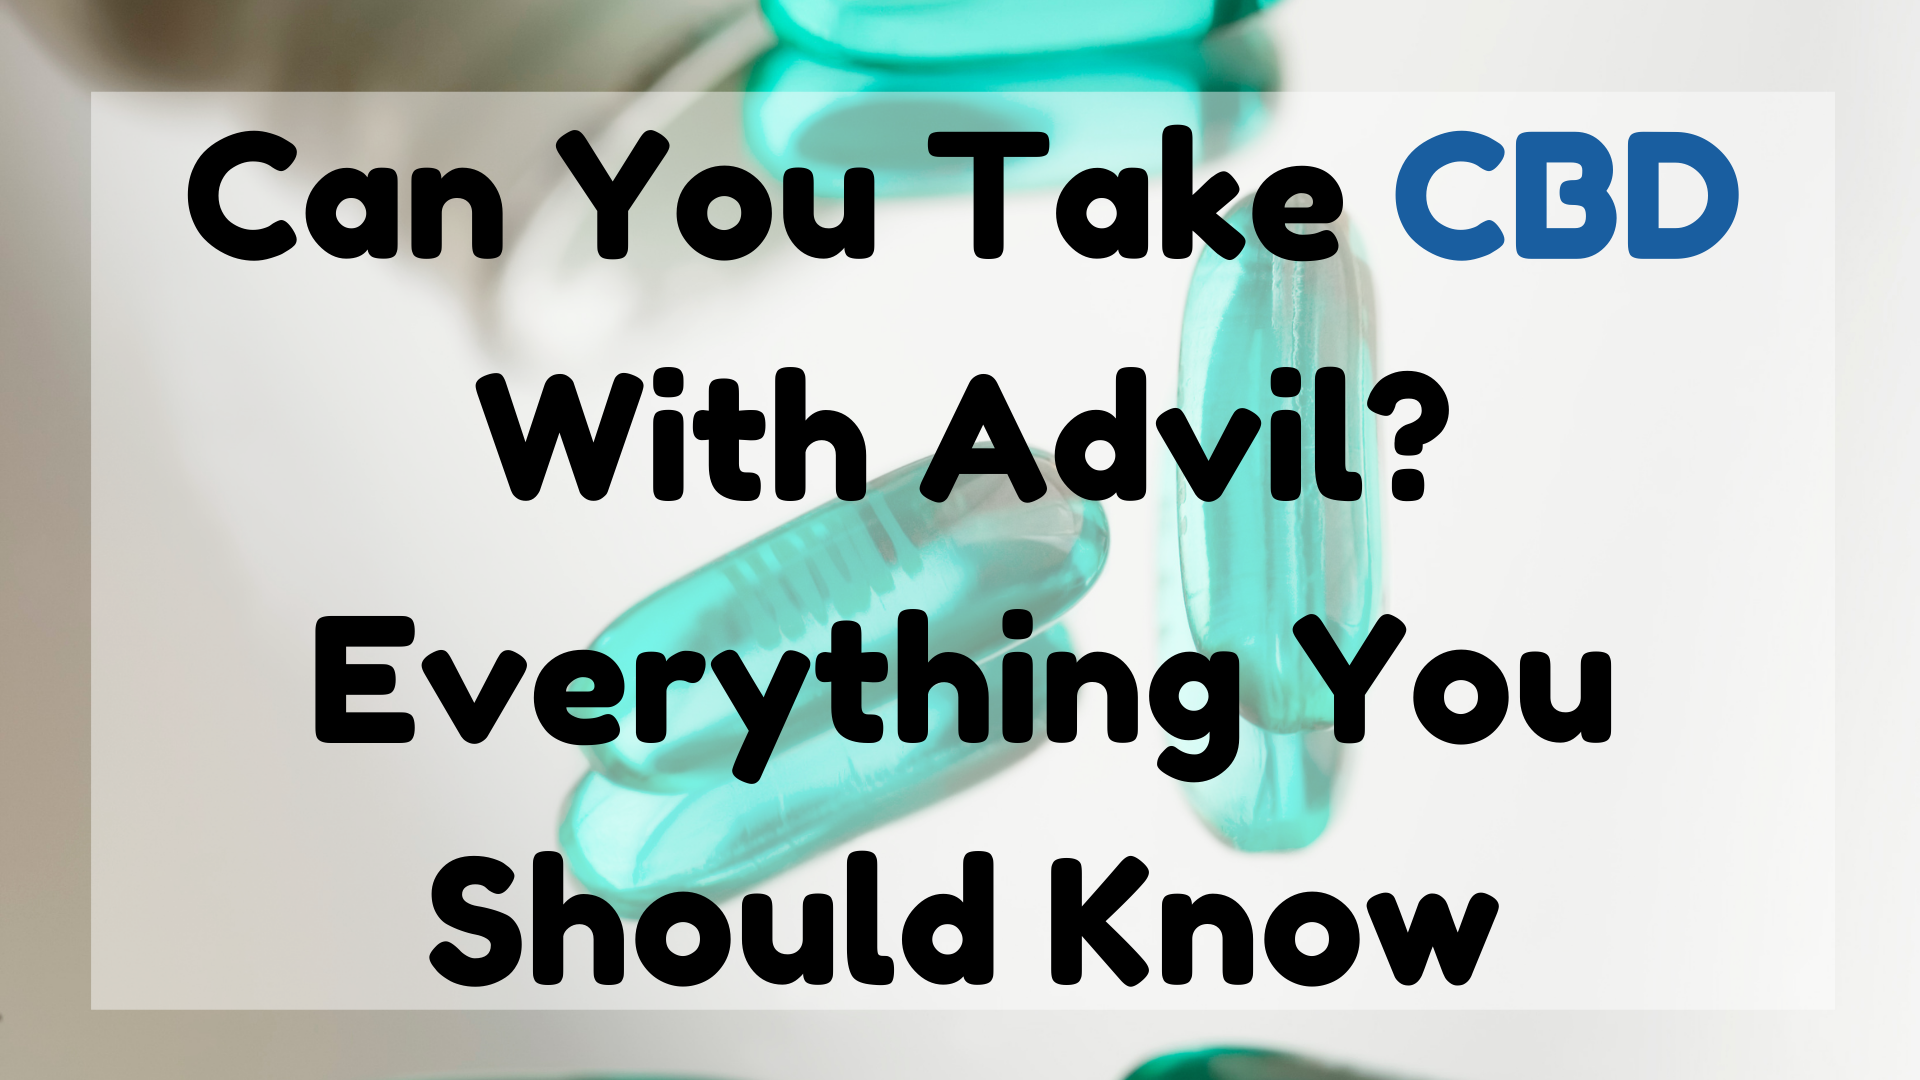 Can You Take CBD with Advil